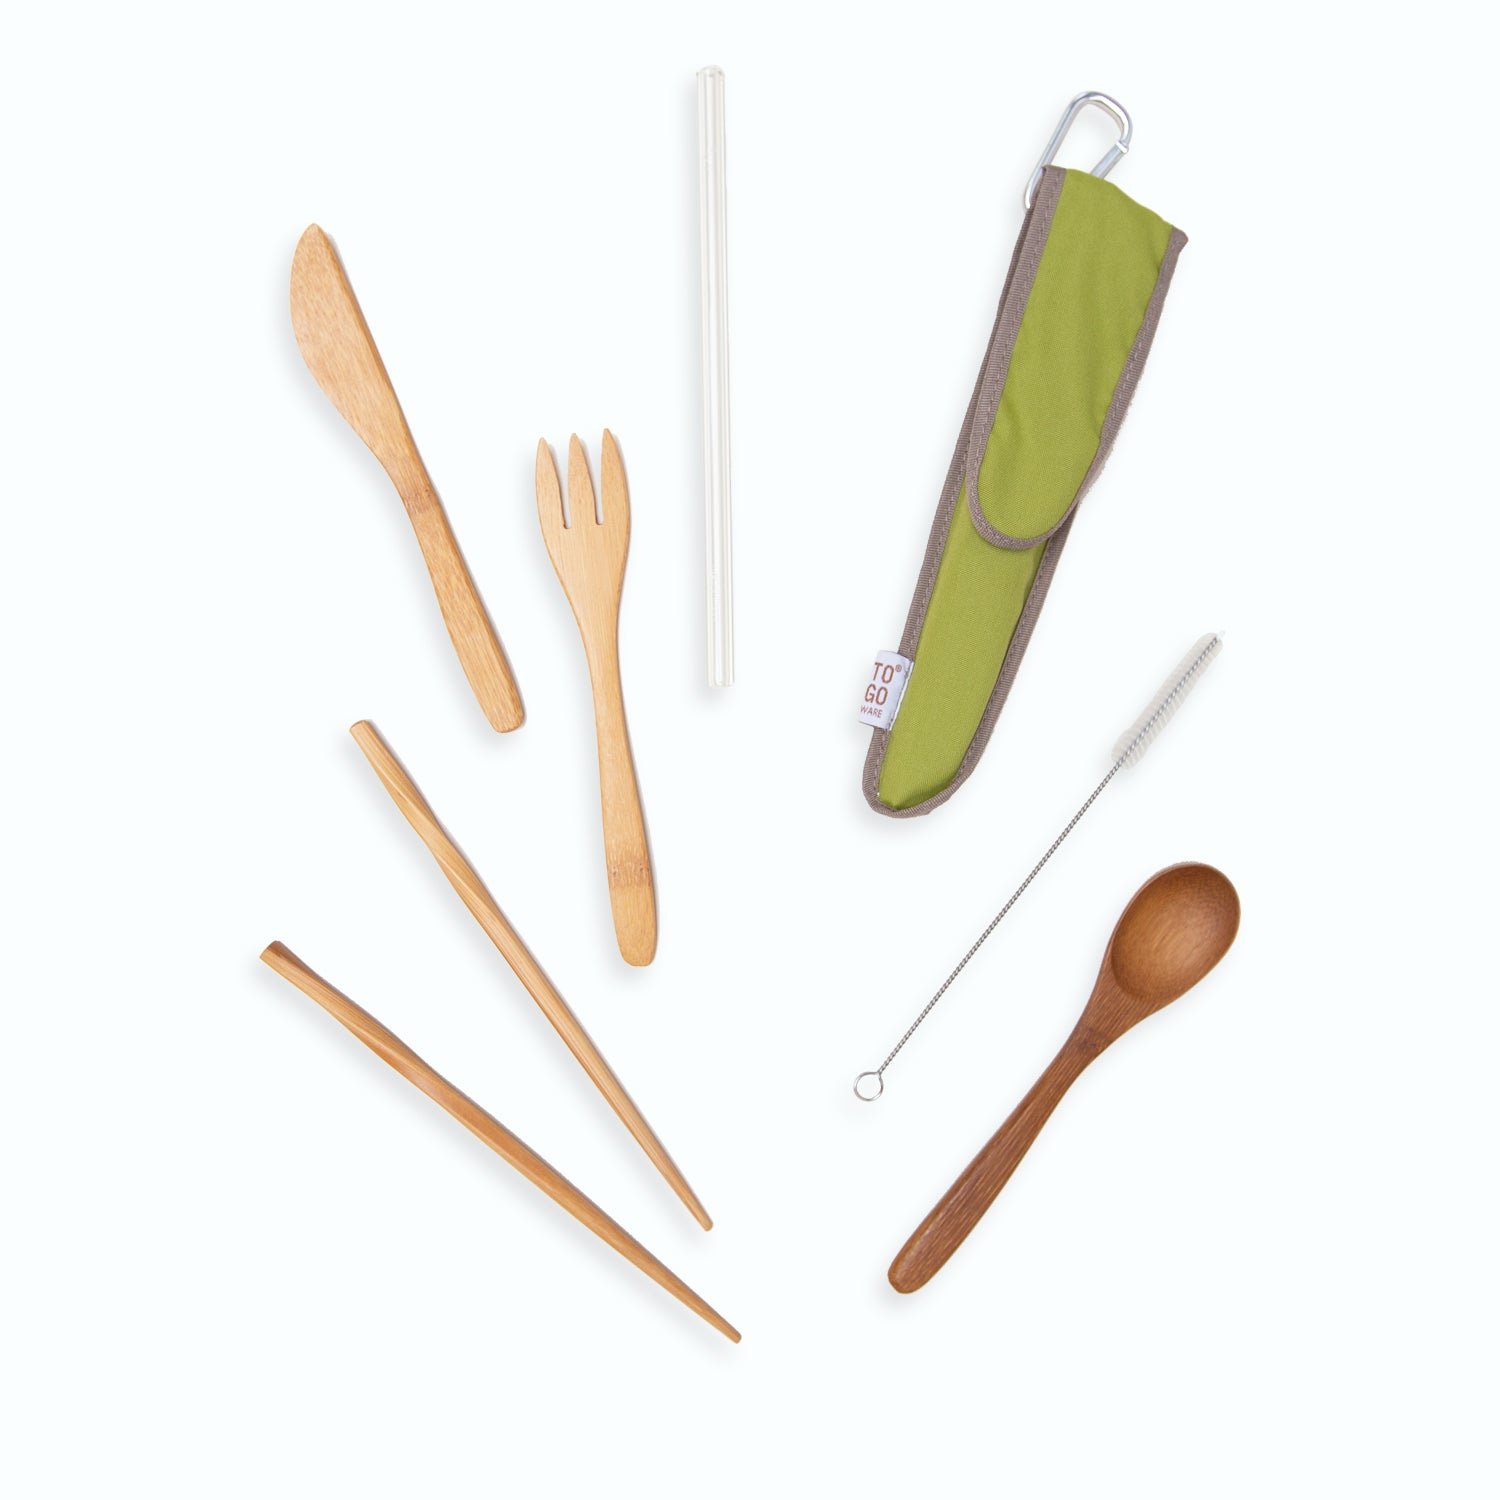 Reusable bamboo to-go silverware set with cloth storage pouch.